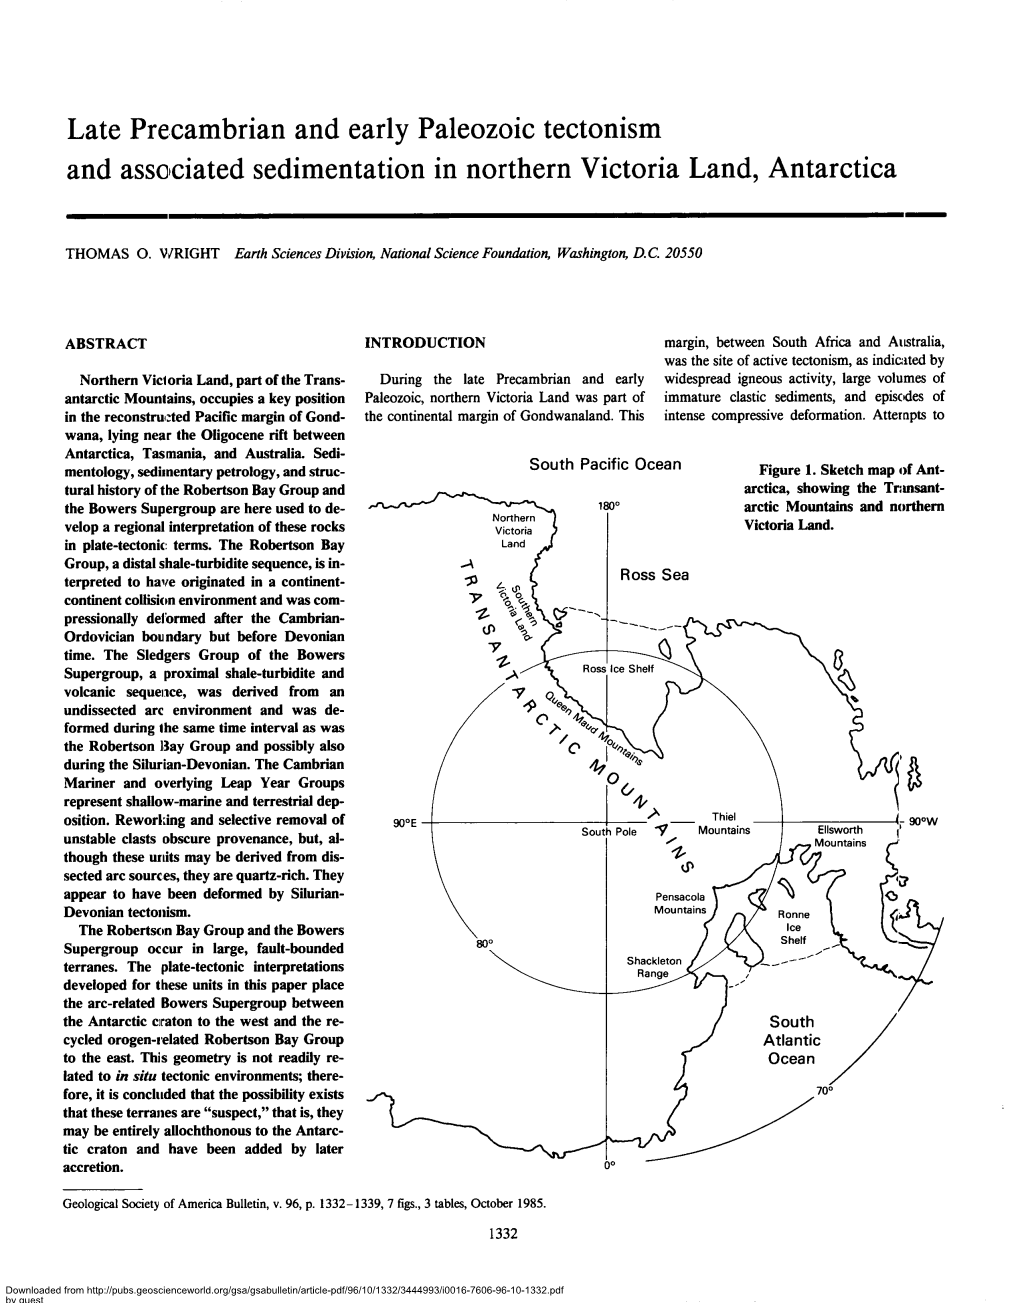 Late Precambrian and Early Paleozoic Tectonism and Associated Sedimentation in Northern Victoria Land, Antarctica